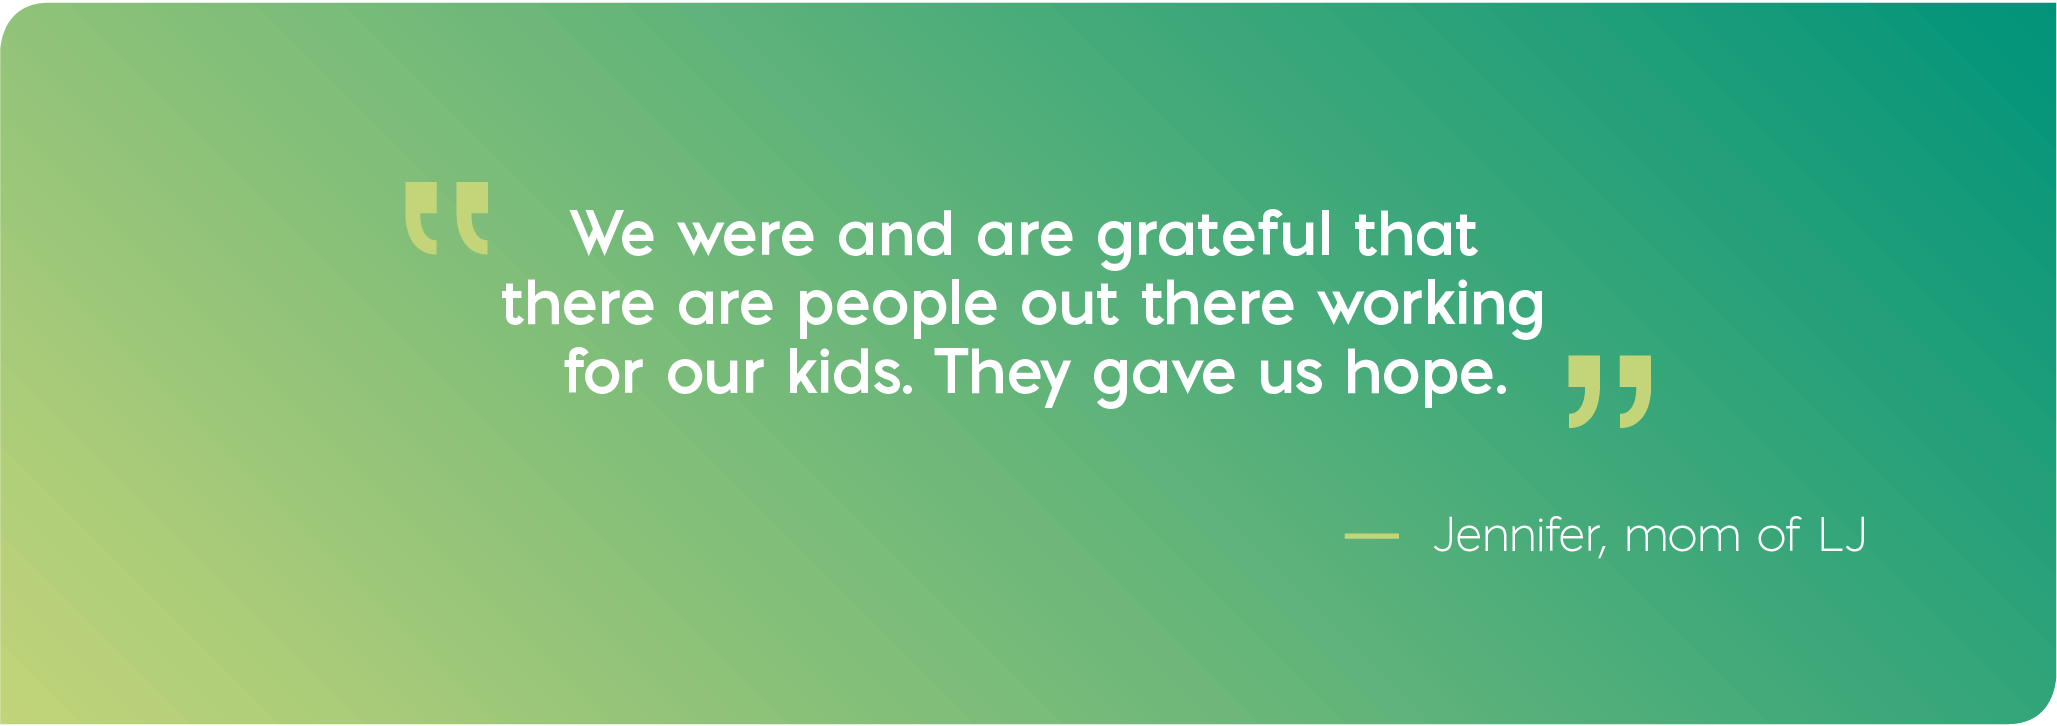 We were and are grateful that there are people out there working for our kids. They gave us hope. Quote from Jennifer, mom of LJ